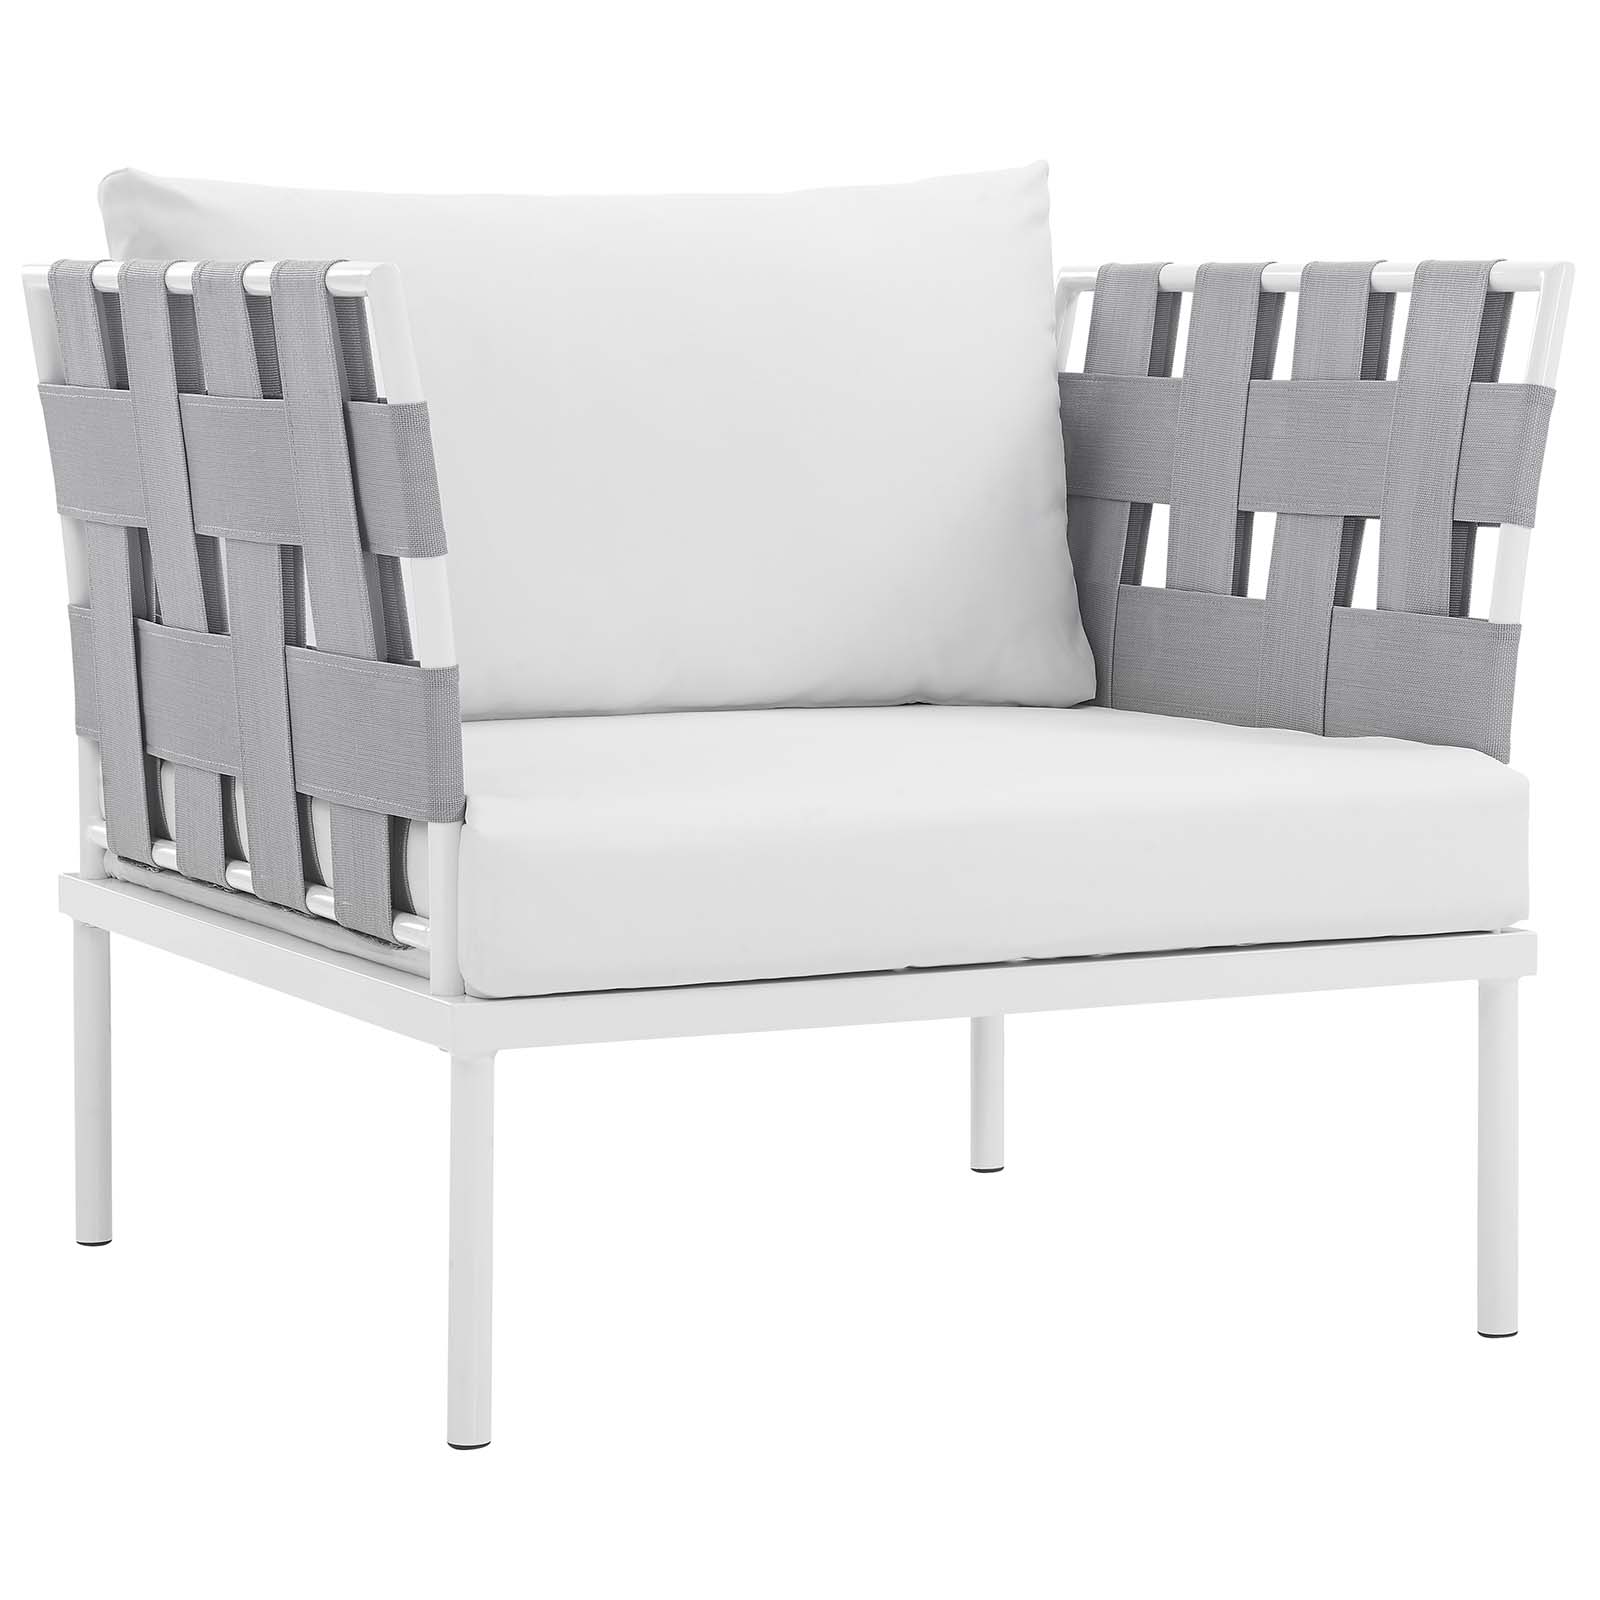 Modern Contemporary Urban Design Outdoor Patio Balcony Three PCS Chairs and Side Table Set, White, Rattan - image 5 of 6